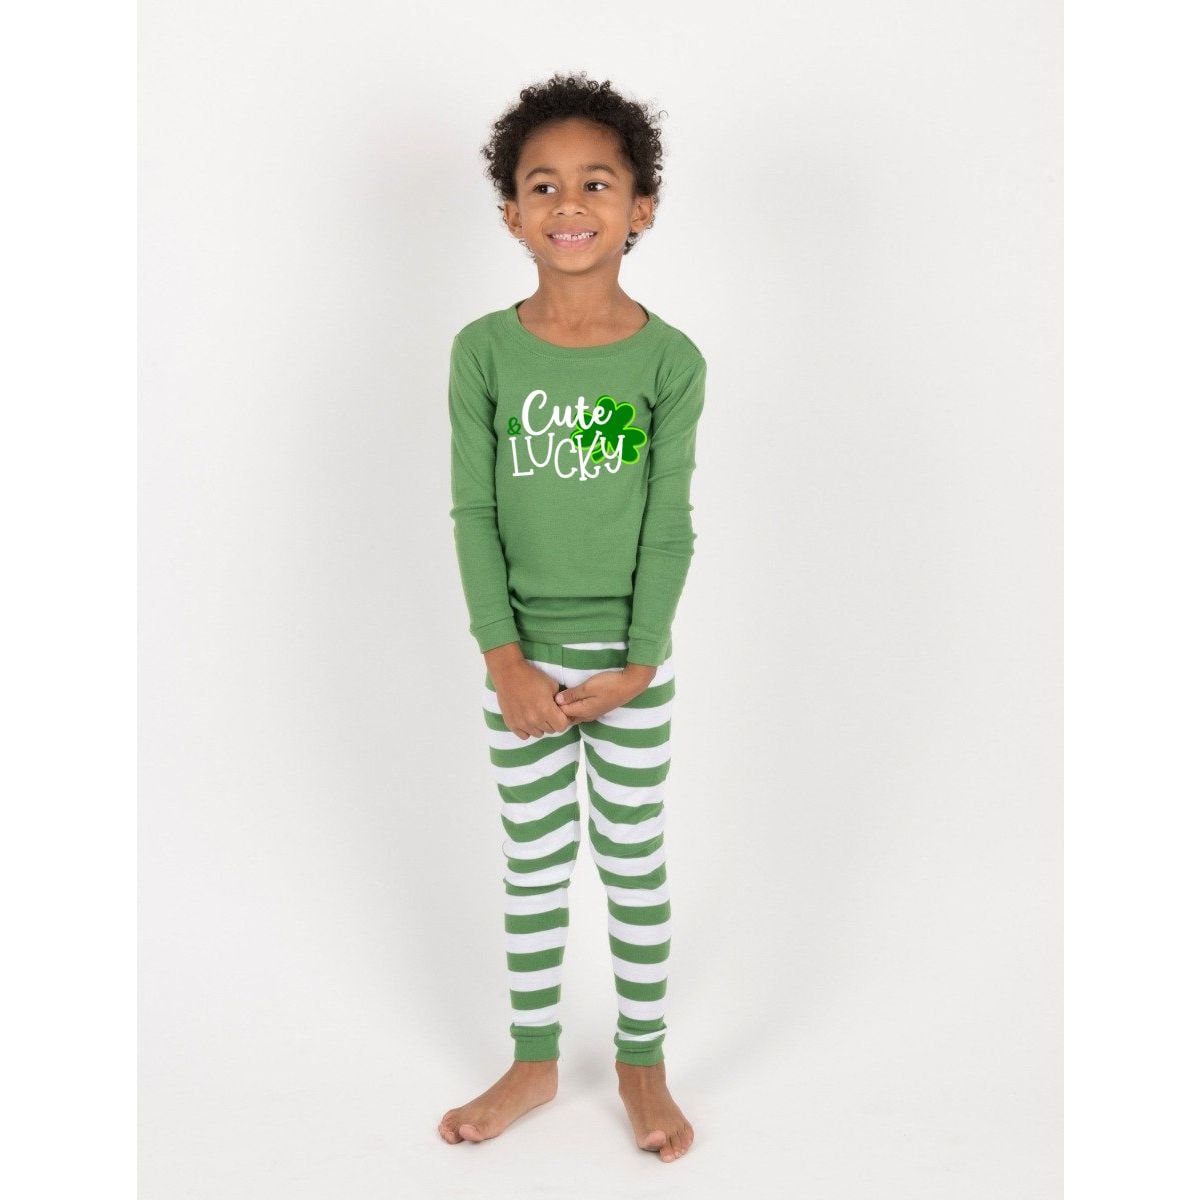 Cute and Lucky Green Striped St Patrick's Day Pajamas - Kids, Adults and Dog Sizes, toddler st patty's pjs - baby st patty's pjs